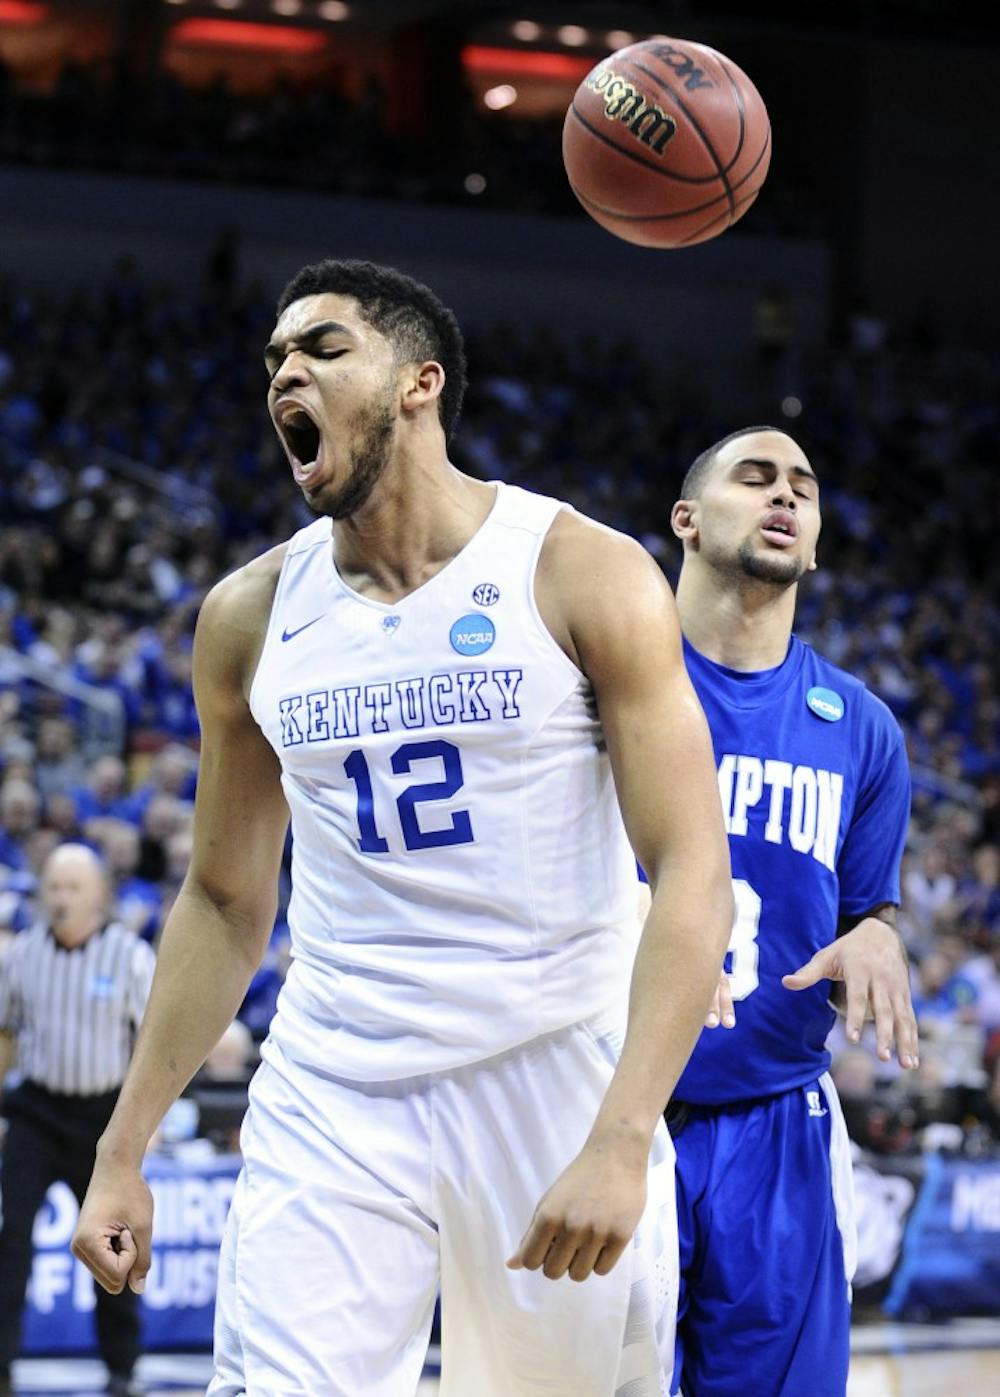 Kentucky's Karl-Anthony Towns (12) celebrates after scoring and being fouled by Hampton's Quinton Chievous in the second round of the NCAA Tournament at the KFC Yum! Center in Louisville, Ky., on Thursday, March 19, 2015. (Wally Skalij/Los Angeles Times/TNS)